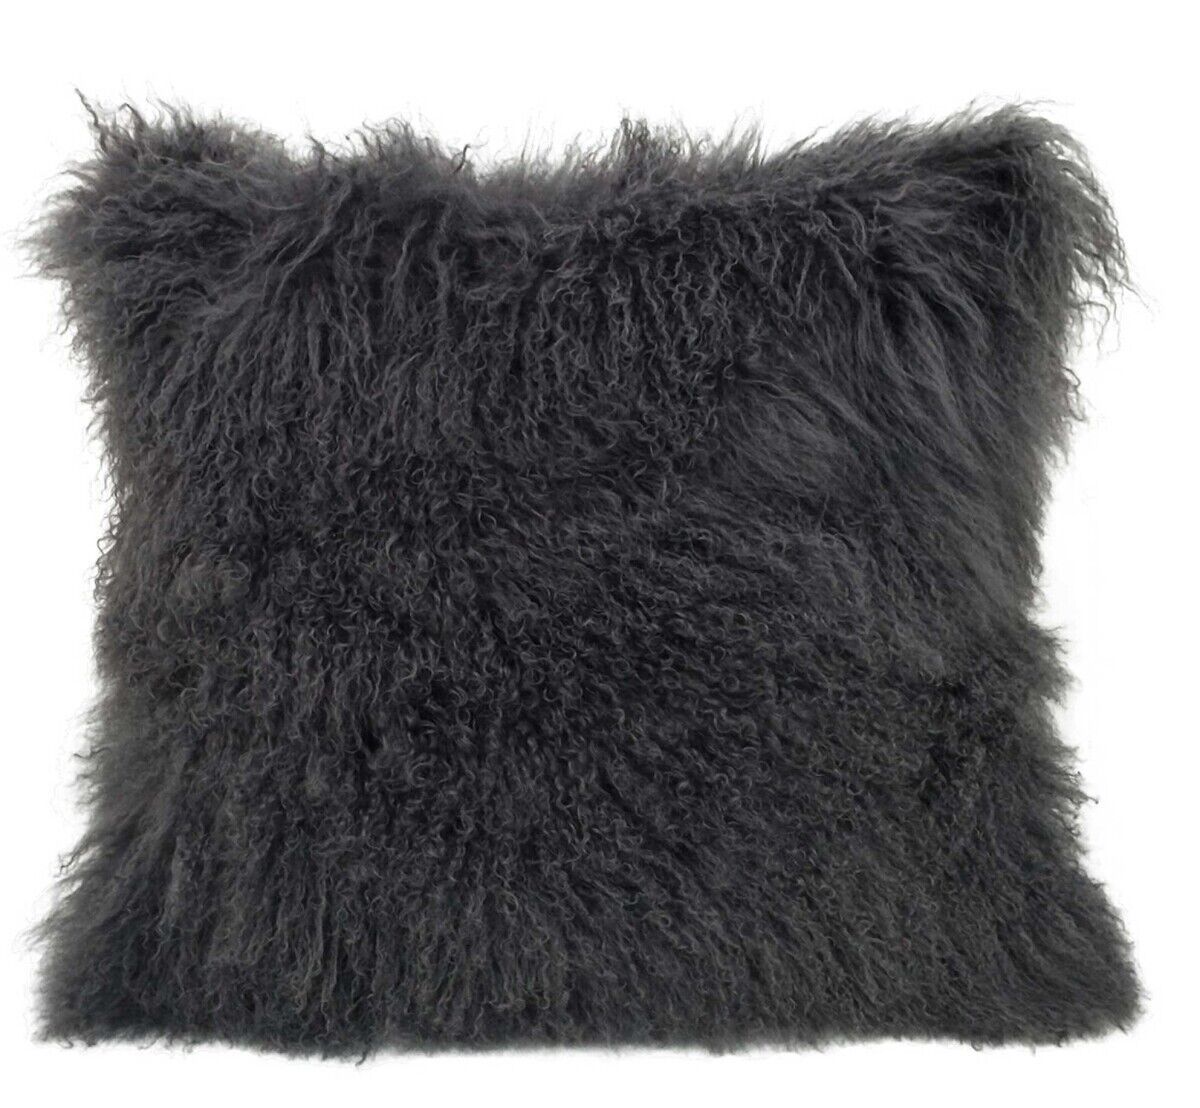 Primary image for HomeRoots 334392 Charcoal Tibetan Lamb Pillow